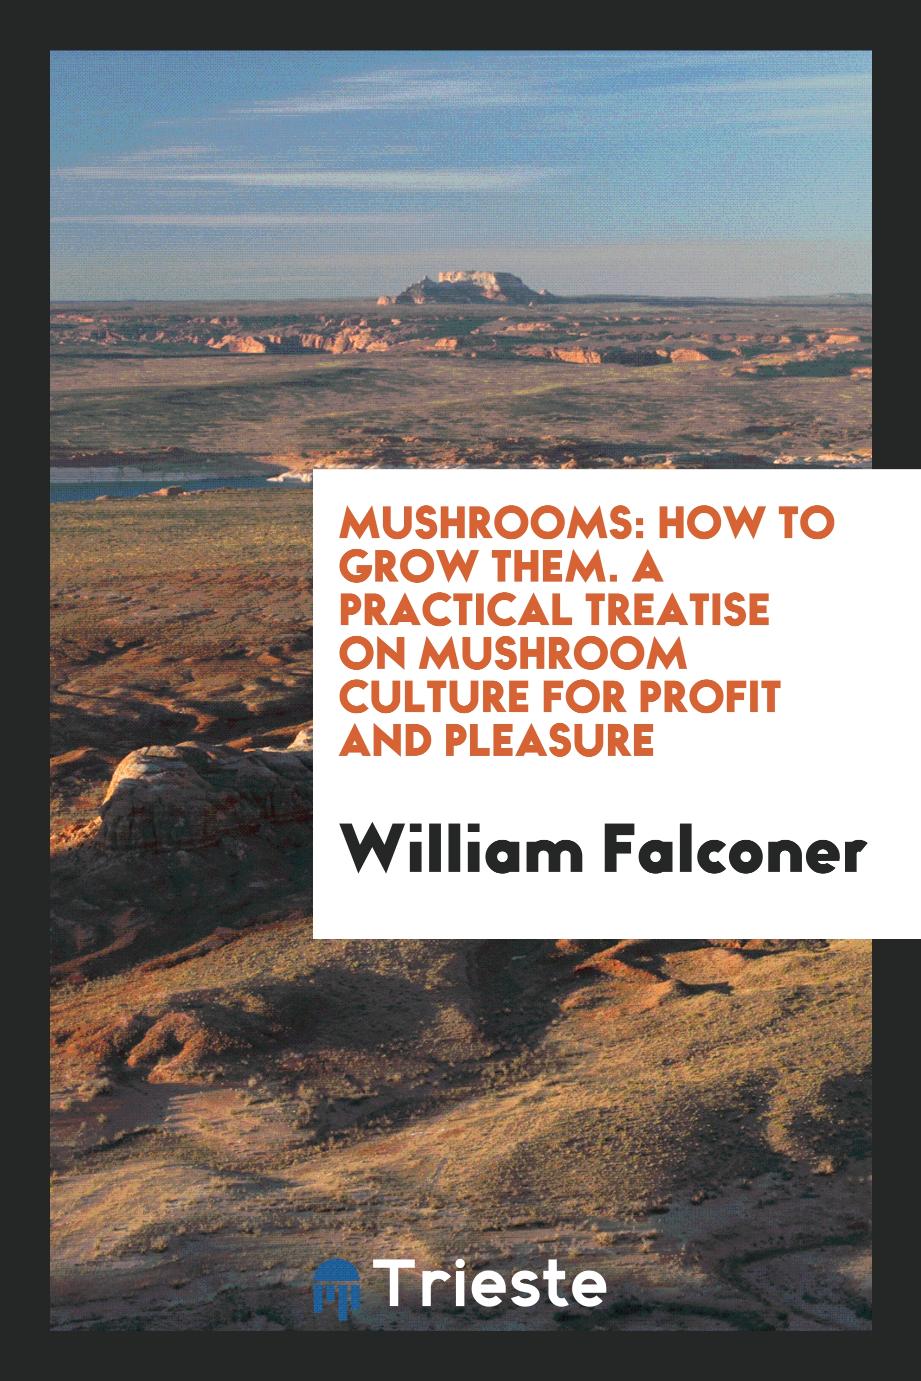 Mushrooms: How to Grow Them. A Practical Treatise on Mushroom Culture for Profit and Pleasure